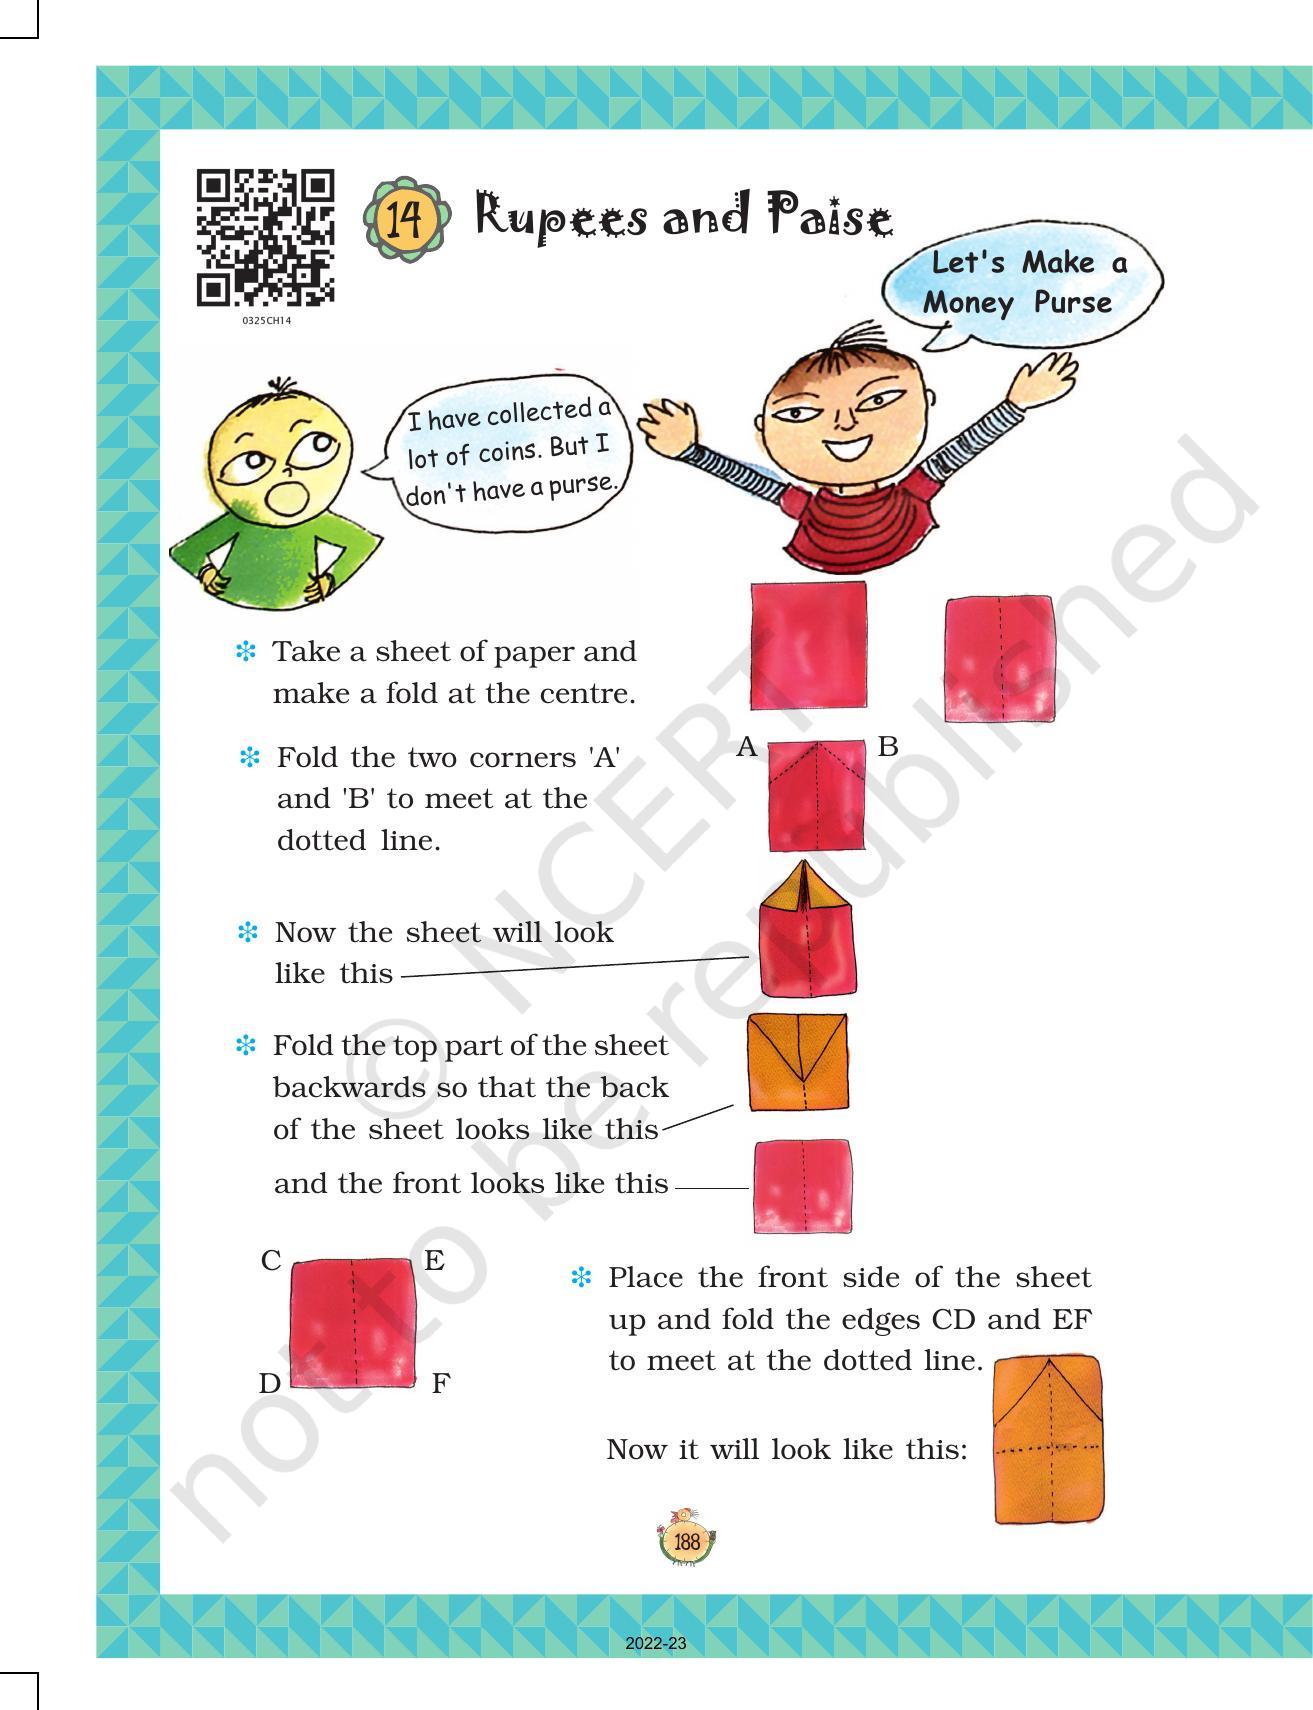 NCERT Book for Class 3 Maths Chapter 14-Rupees and Paise - Page 1